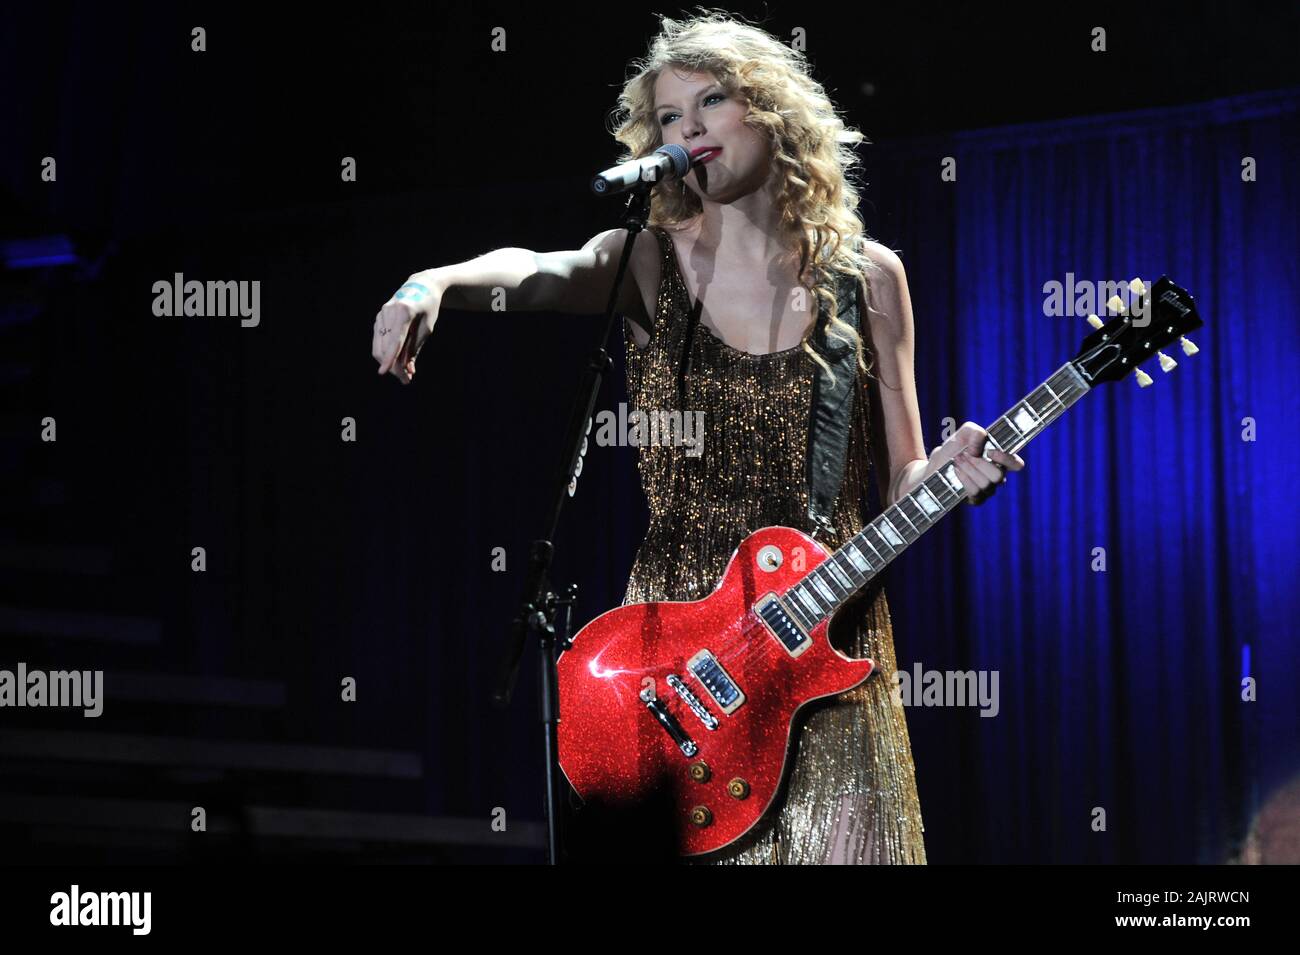 Milano Italy  03/15/2011 : Live concert of Taylor Swift  at Forum Assago Stock Photo